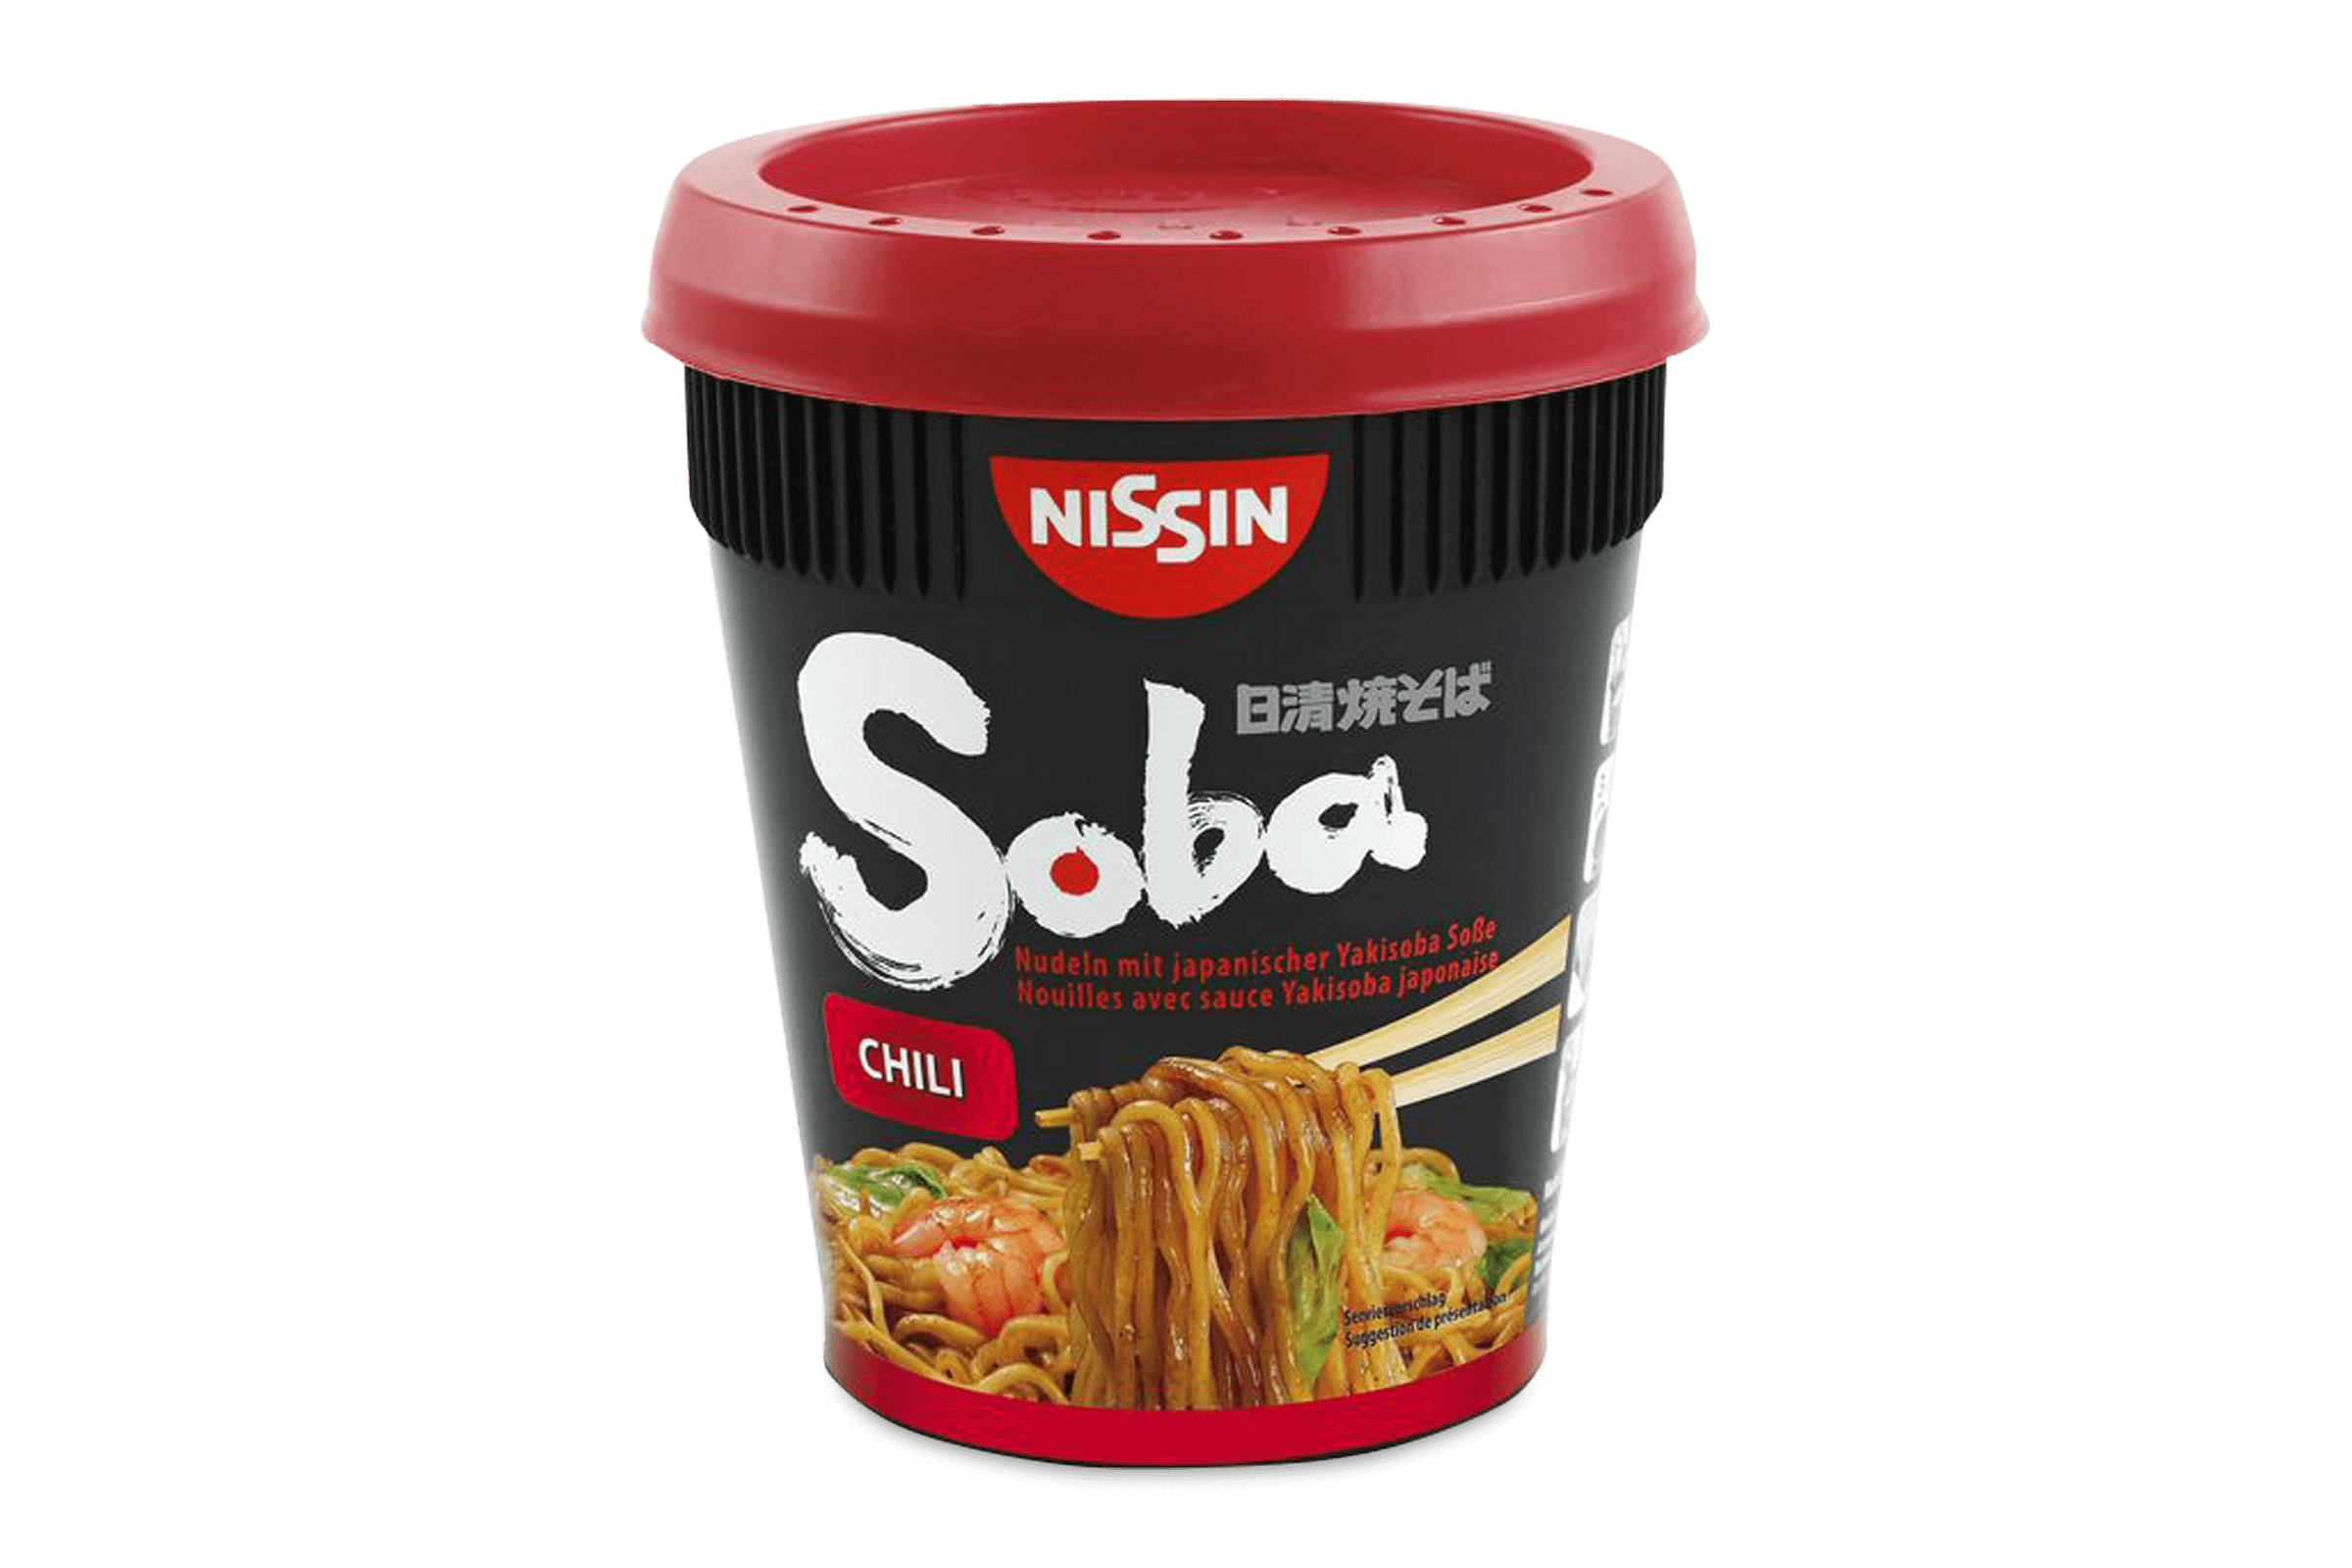 Nisssin Soba Nudeln Chili Cup 1